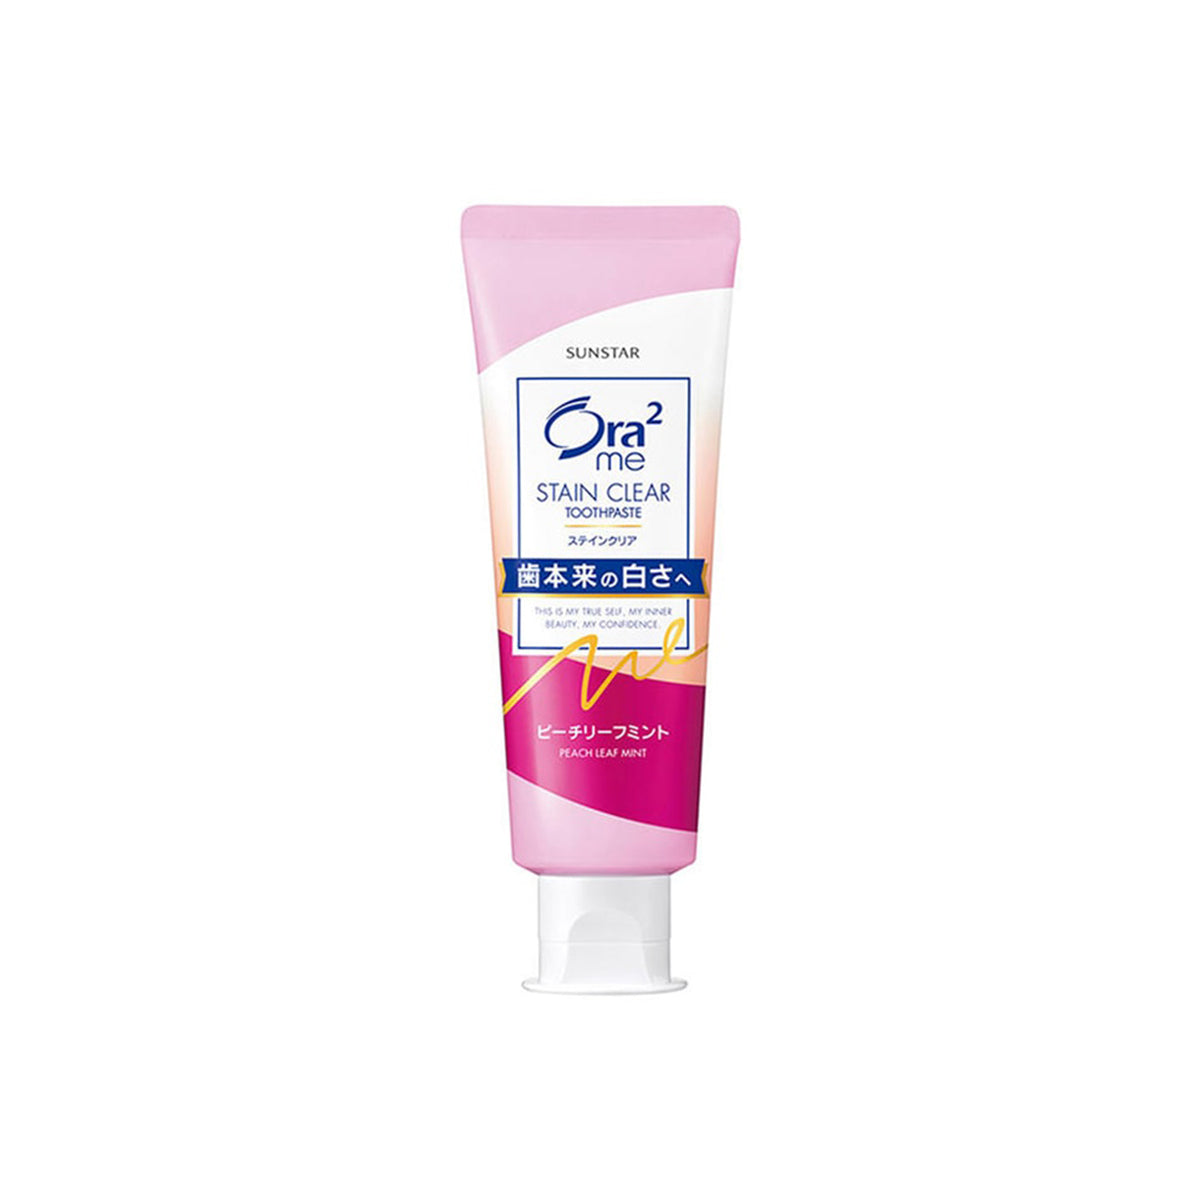 Stain Clear Toothpaste #Peach Mint 130g